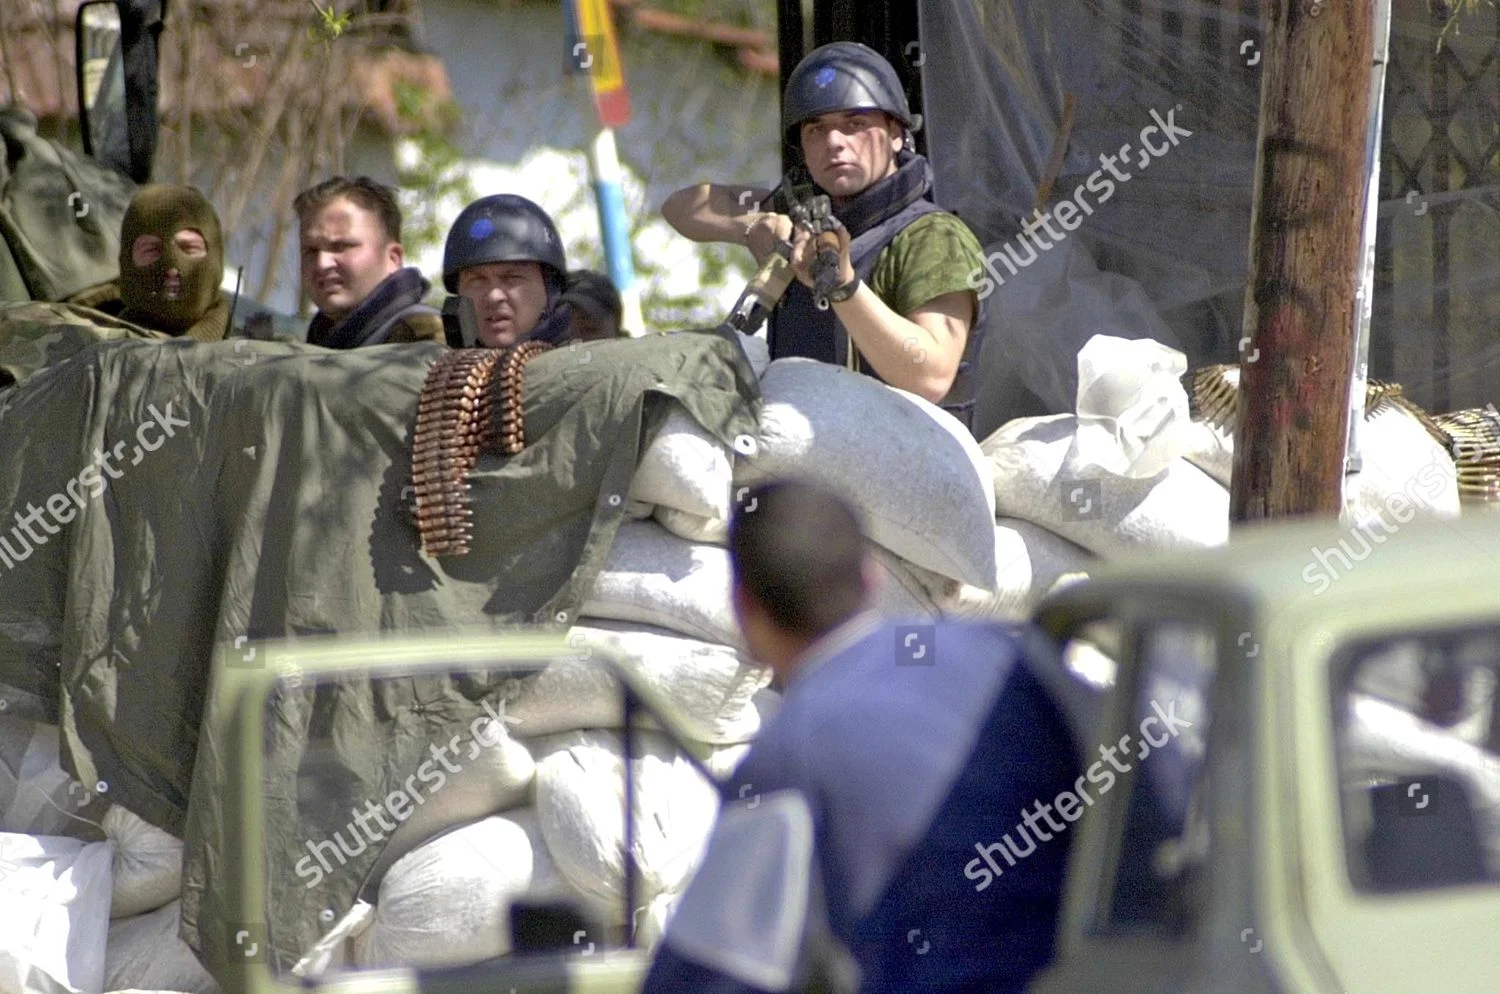 macedonia-police-action-driver-mar-2001-shutterstock-editorial-8482115a.jpg